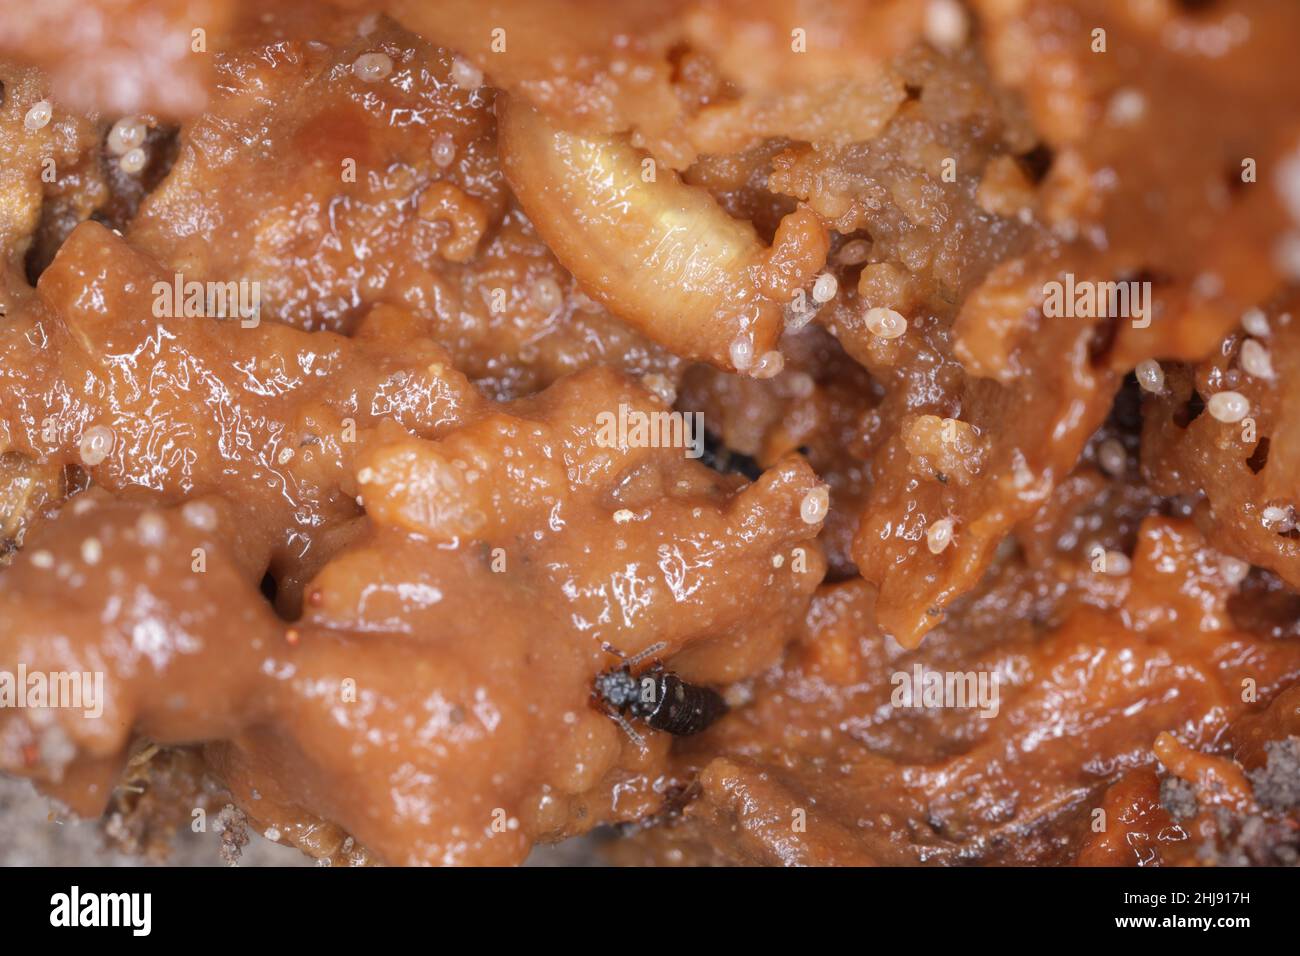 Staphylinidae beetle, mites and pupae of Eumerus strigatus in a rotting onion. Stock Photo